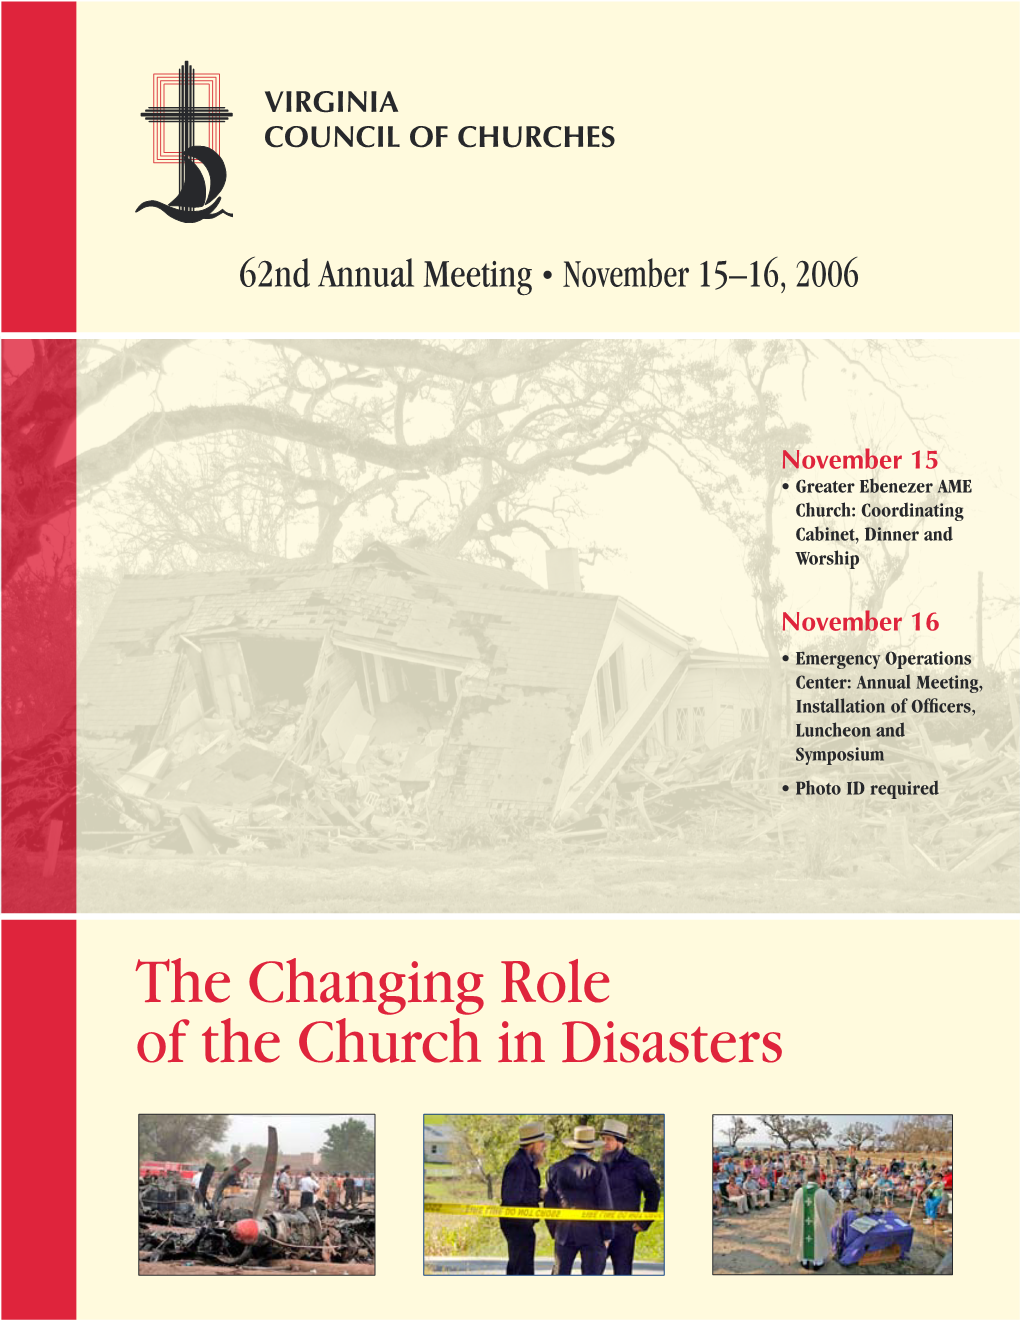 The Changing Role of the Church in Disasters